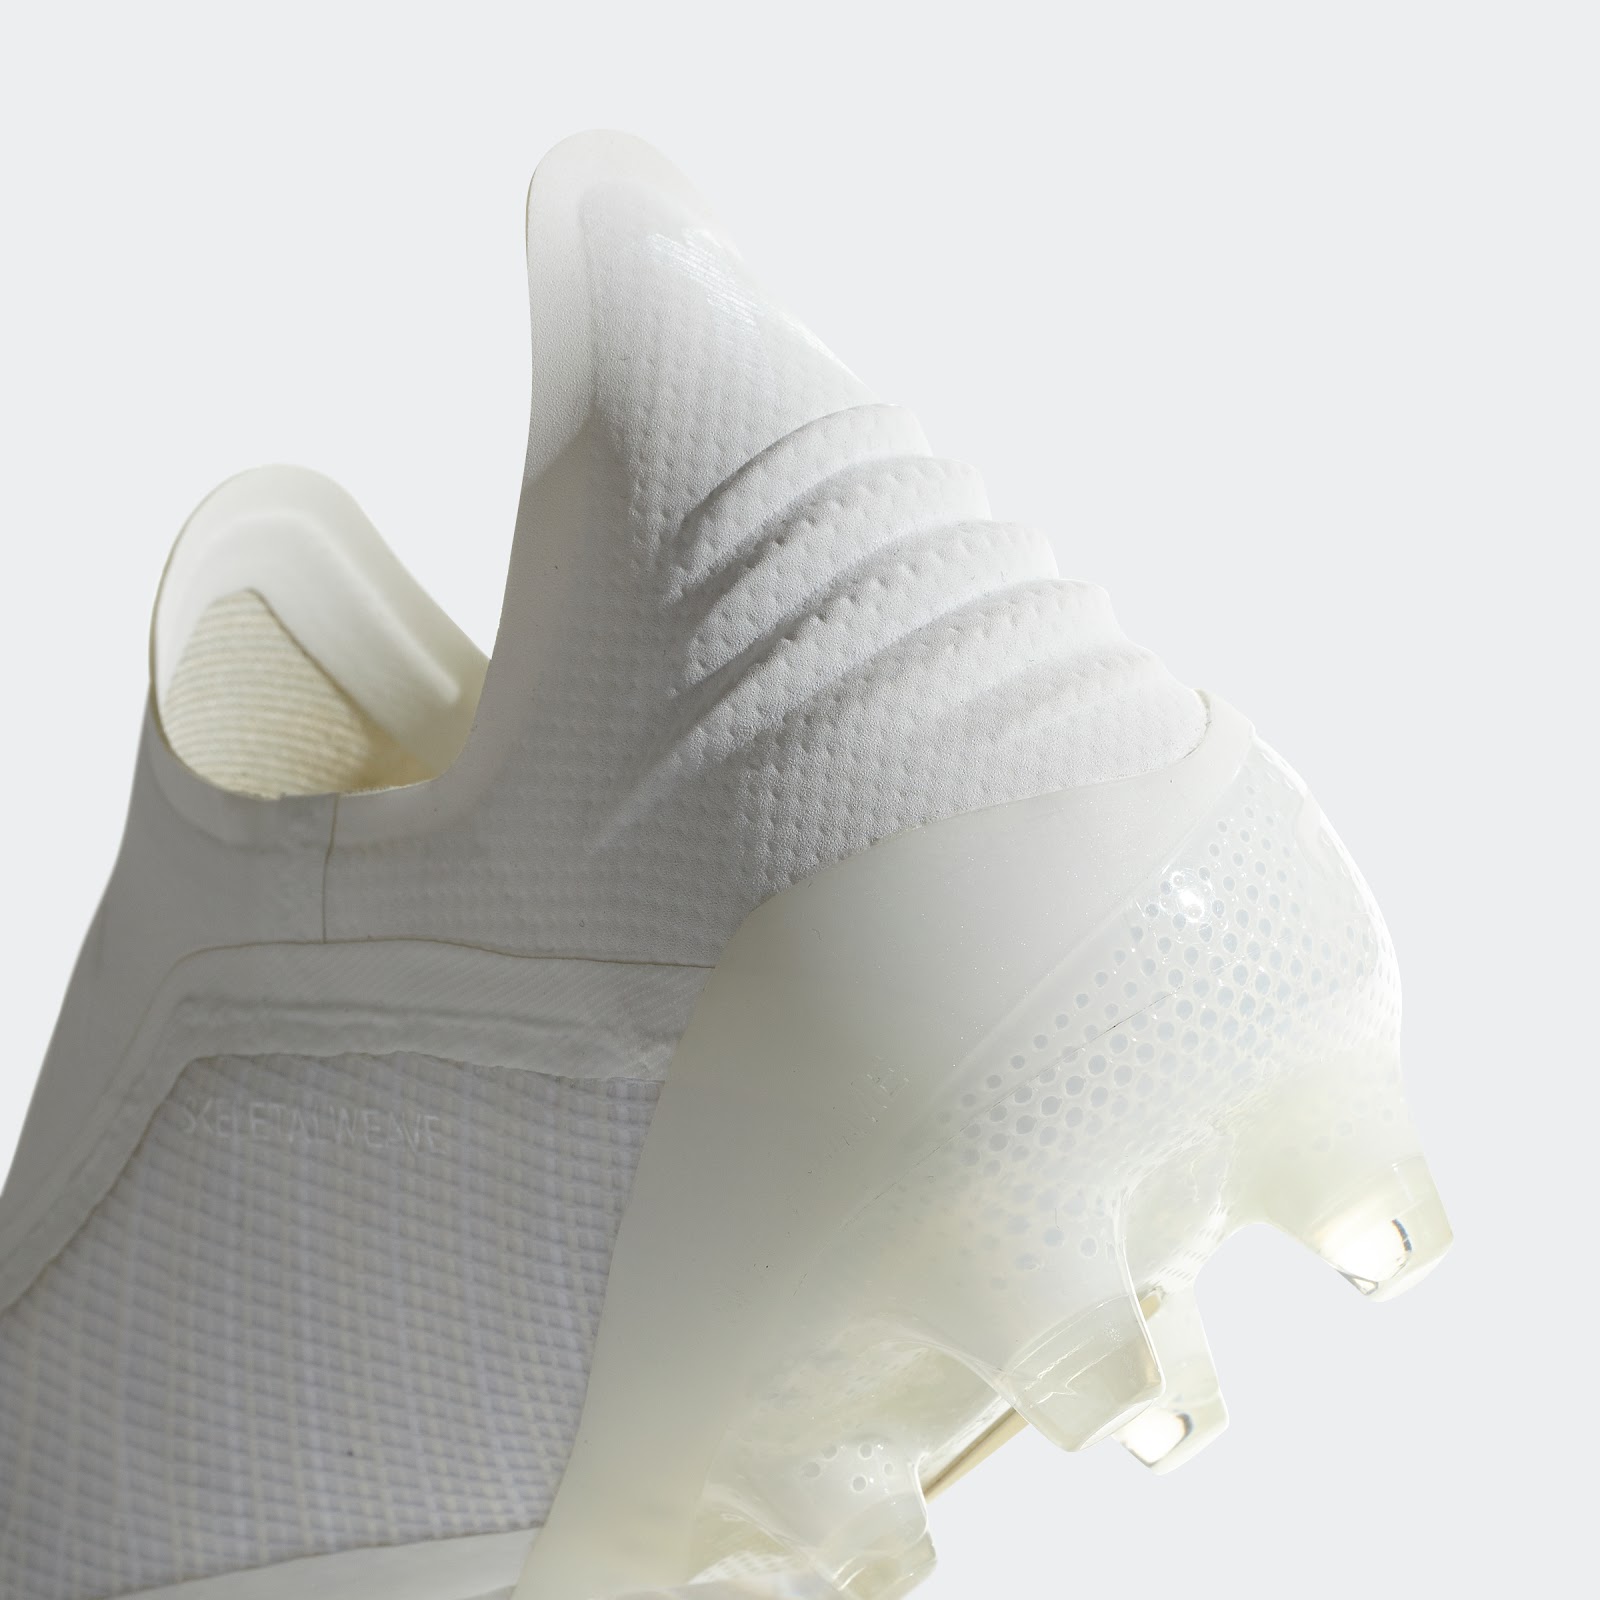 Adidas X 'Spectral Mode' Boots Released - Footy Headlines